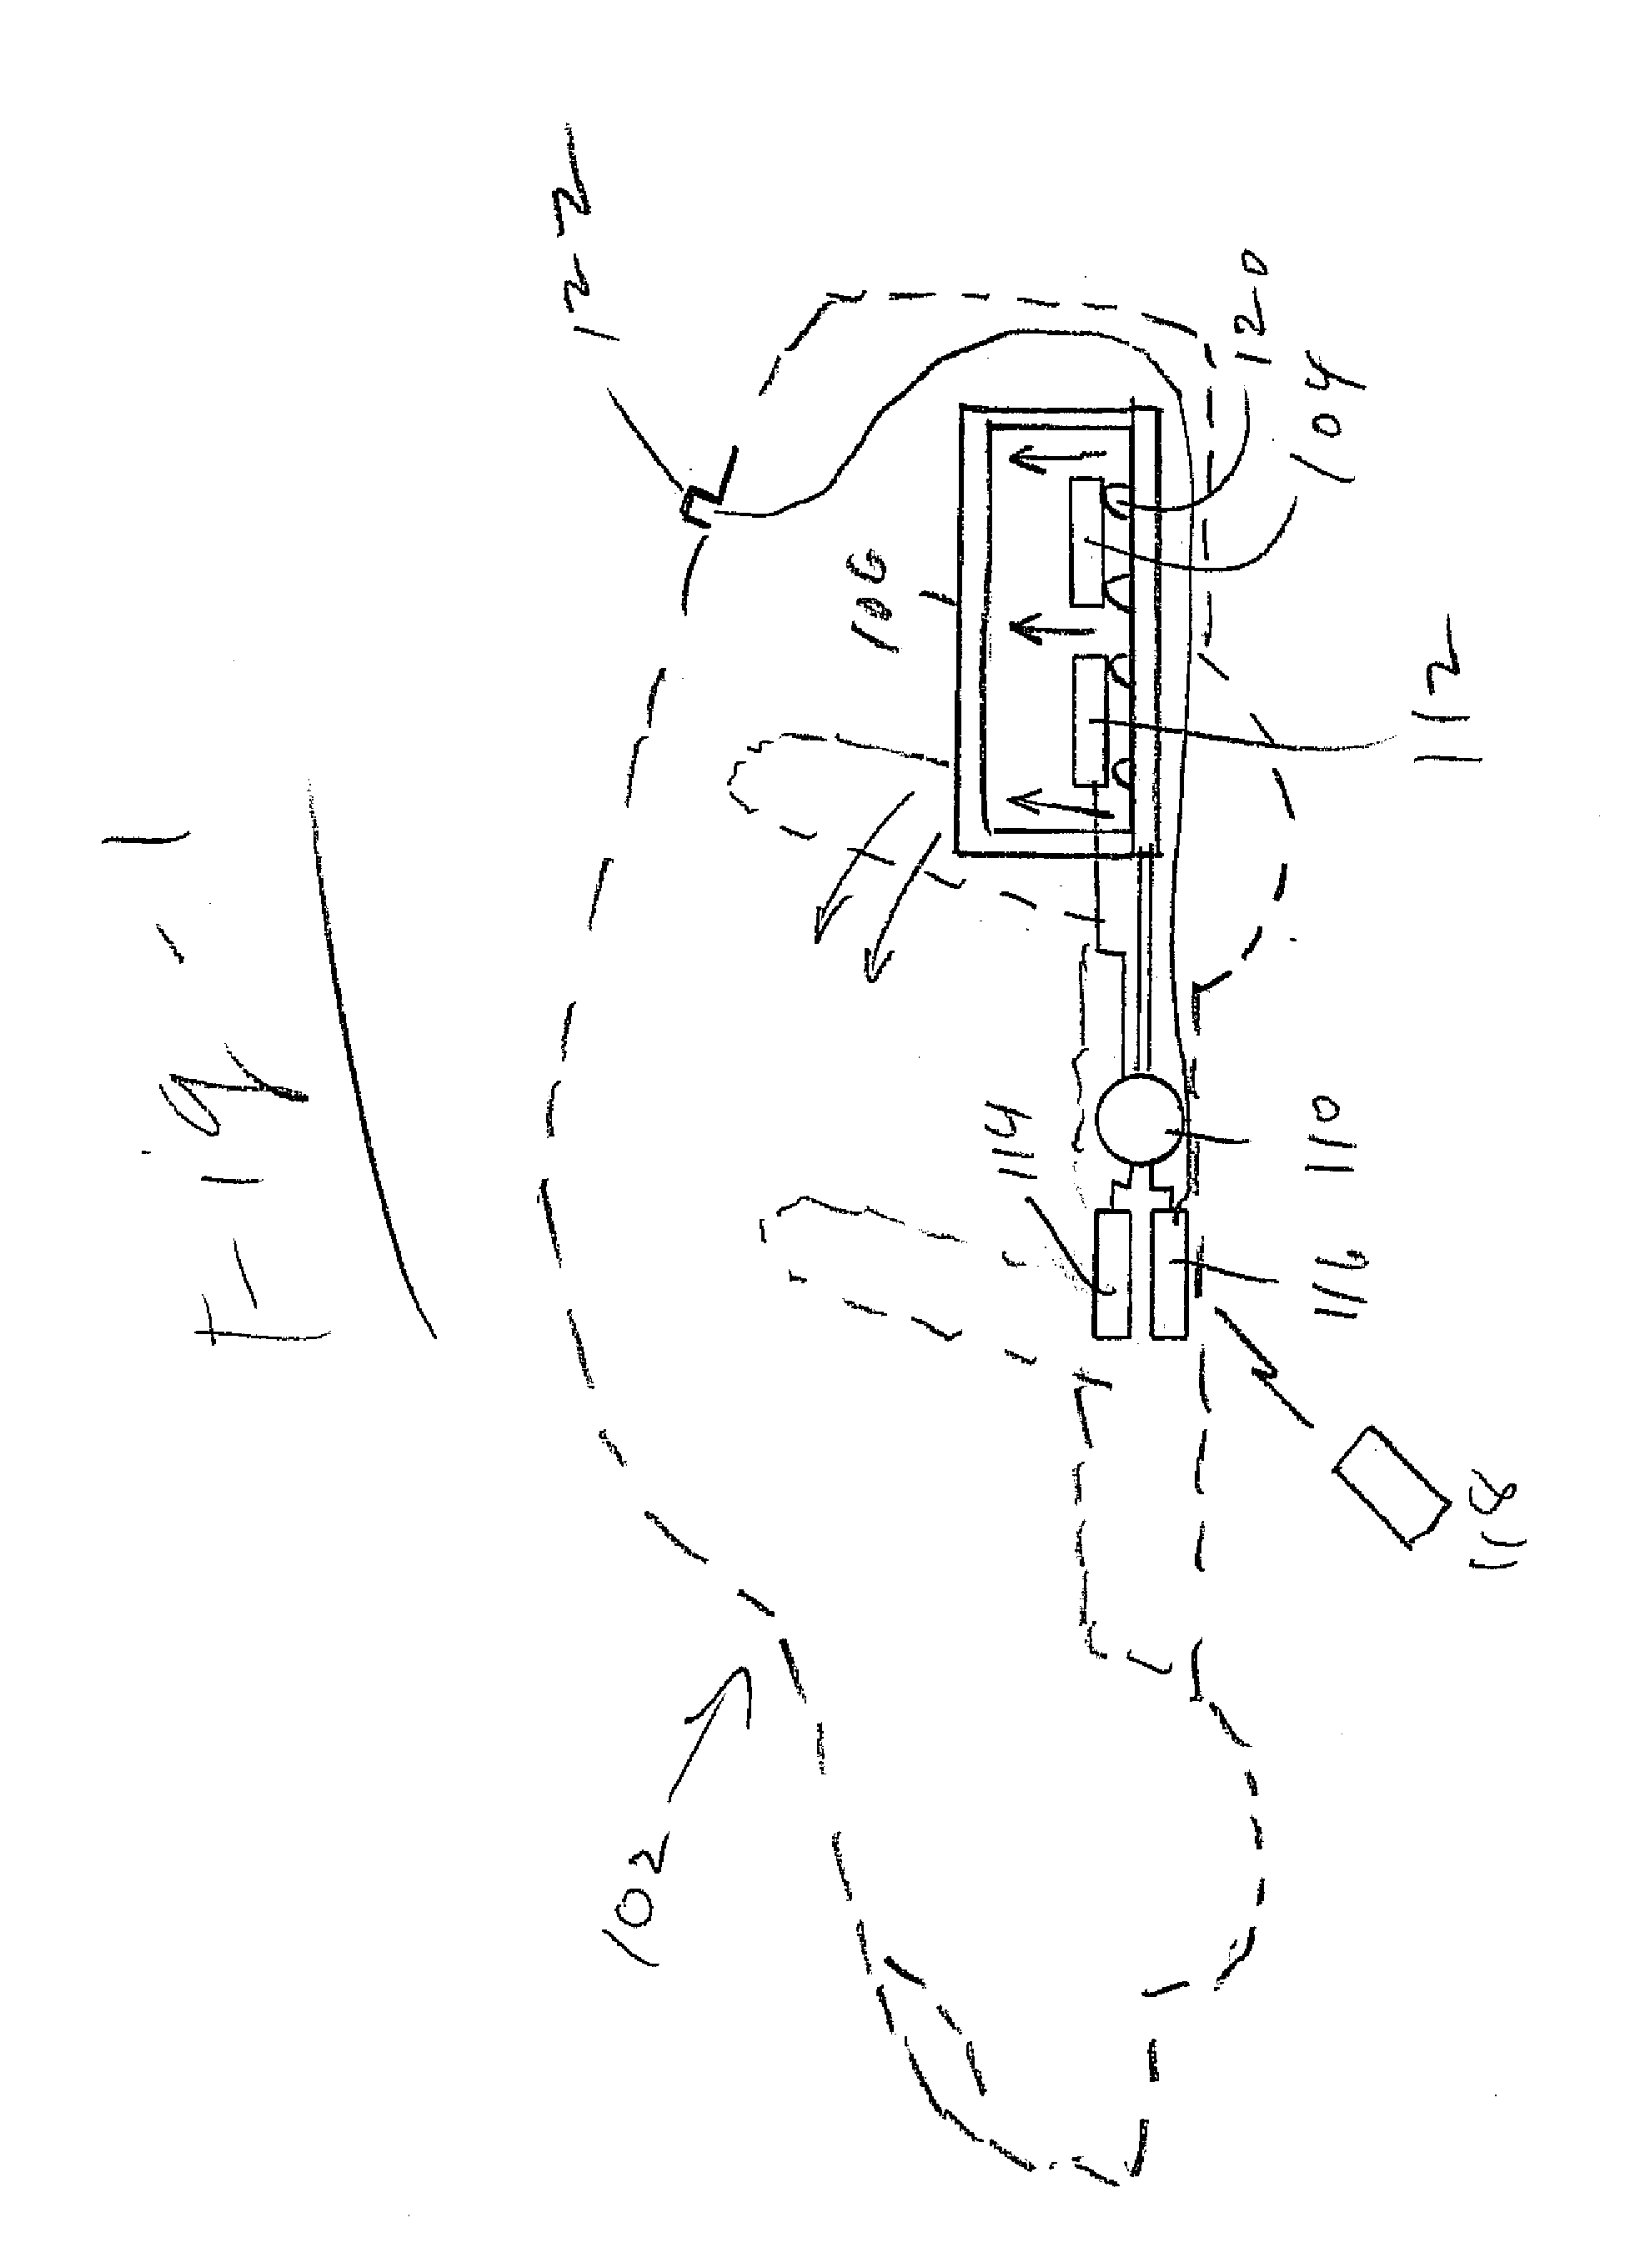 Method to heat or cool vehicle battery and passenger compartments